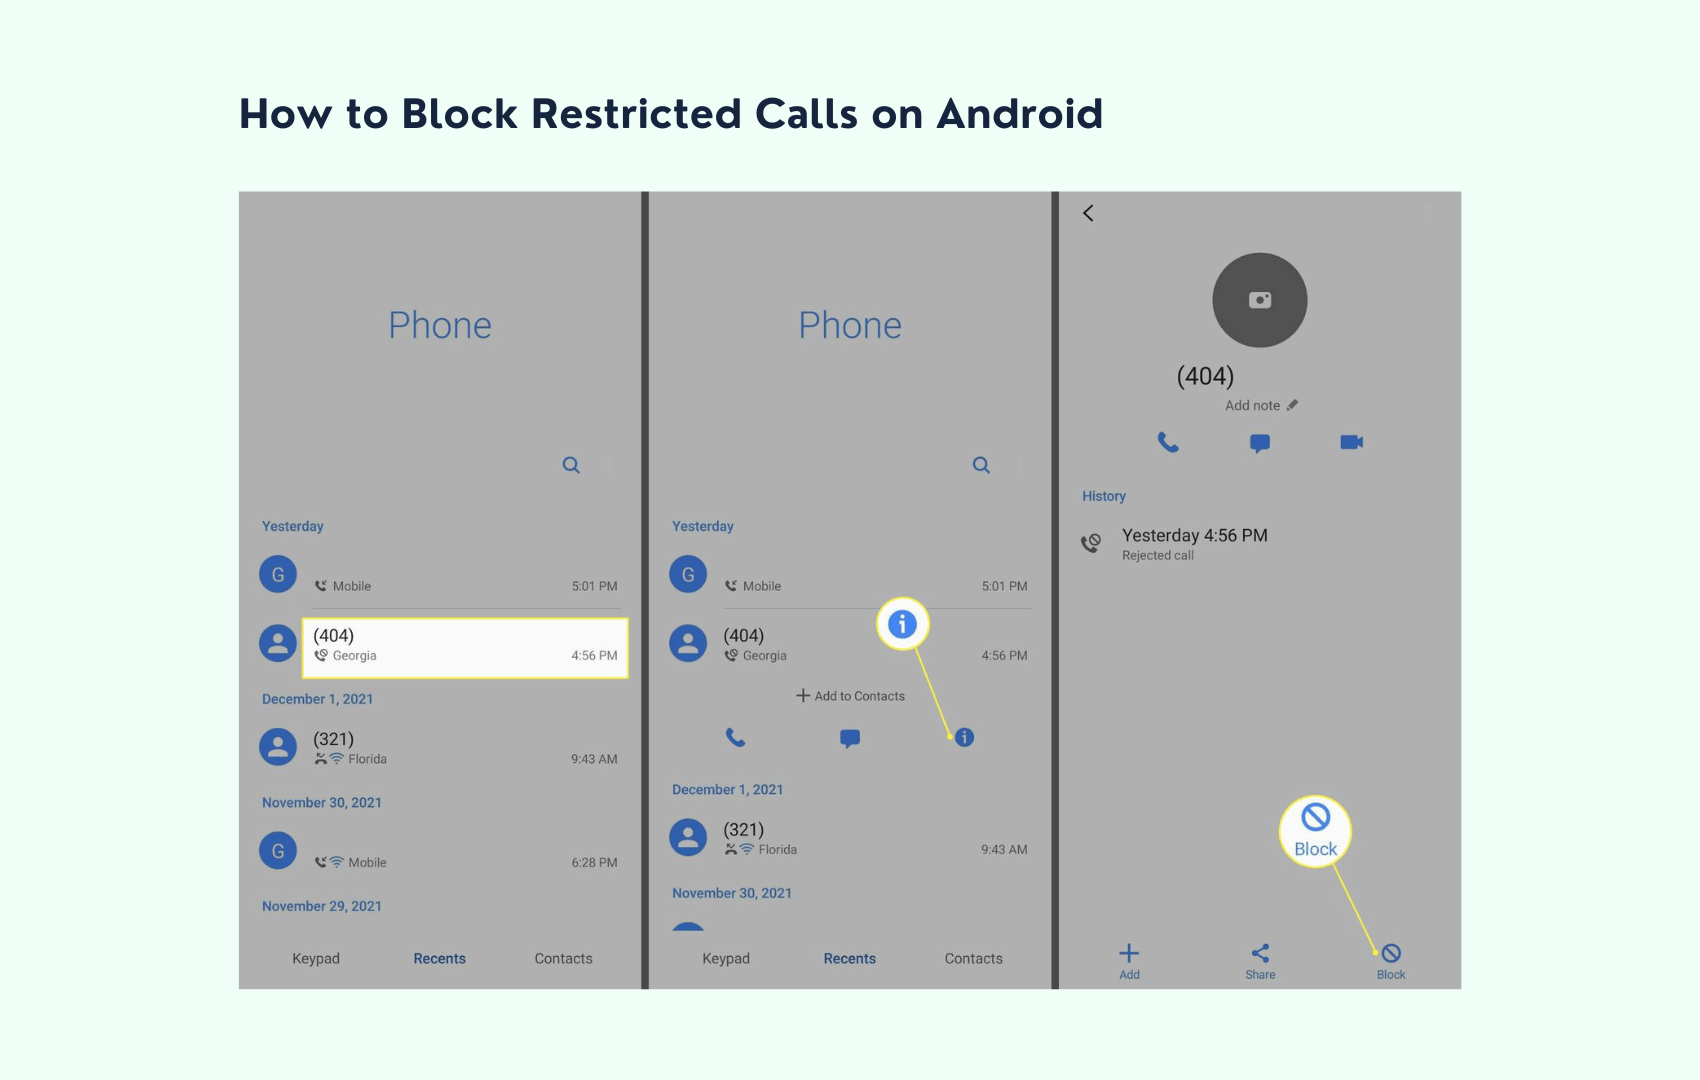 How to Block Restricted Calls on Android